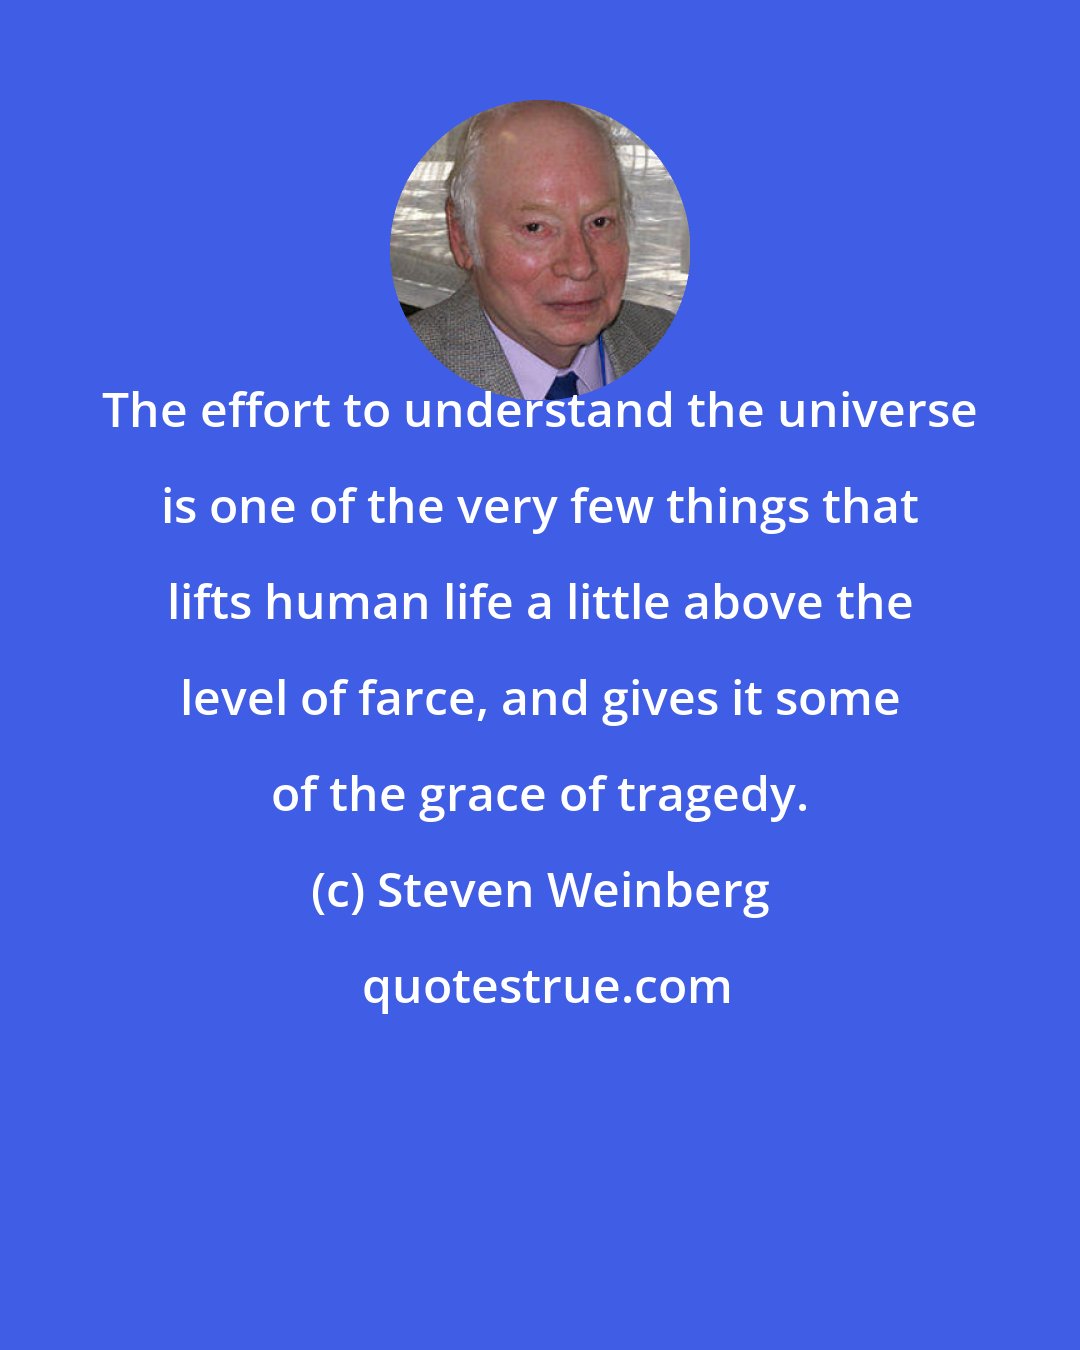 Steven Weinberg: The effort to understand the universe is one of the very few things that lifts human life a little above the level of farce, and gives it some of the grace of tragedy.